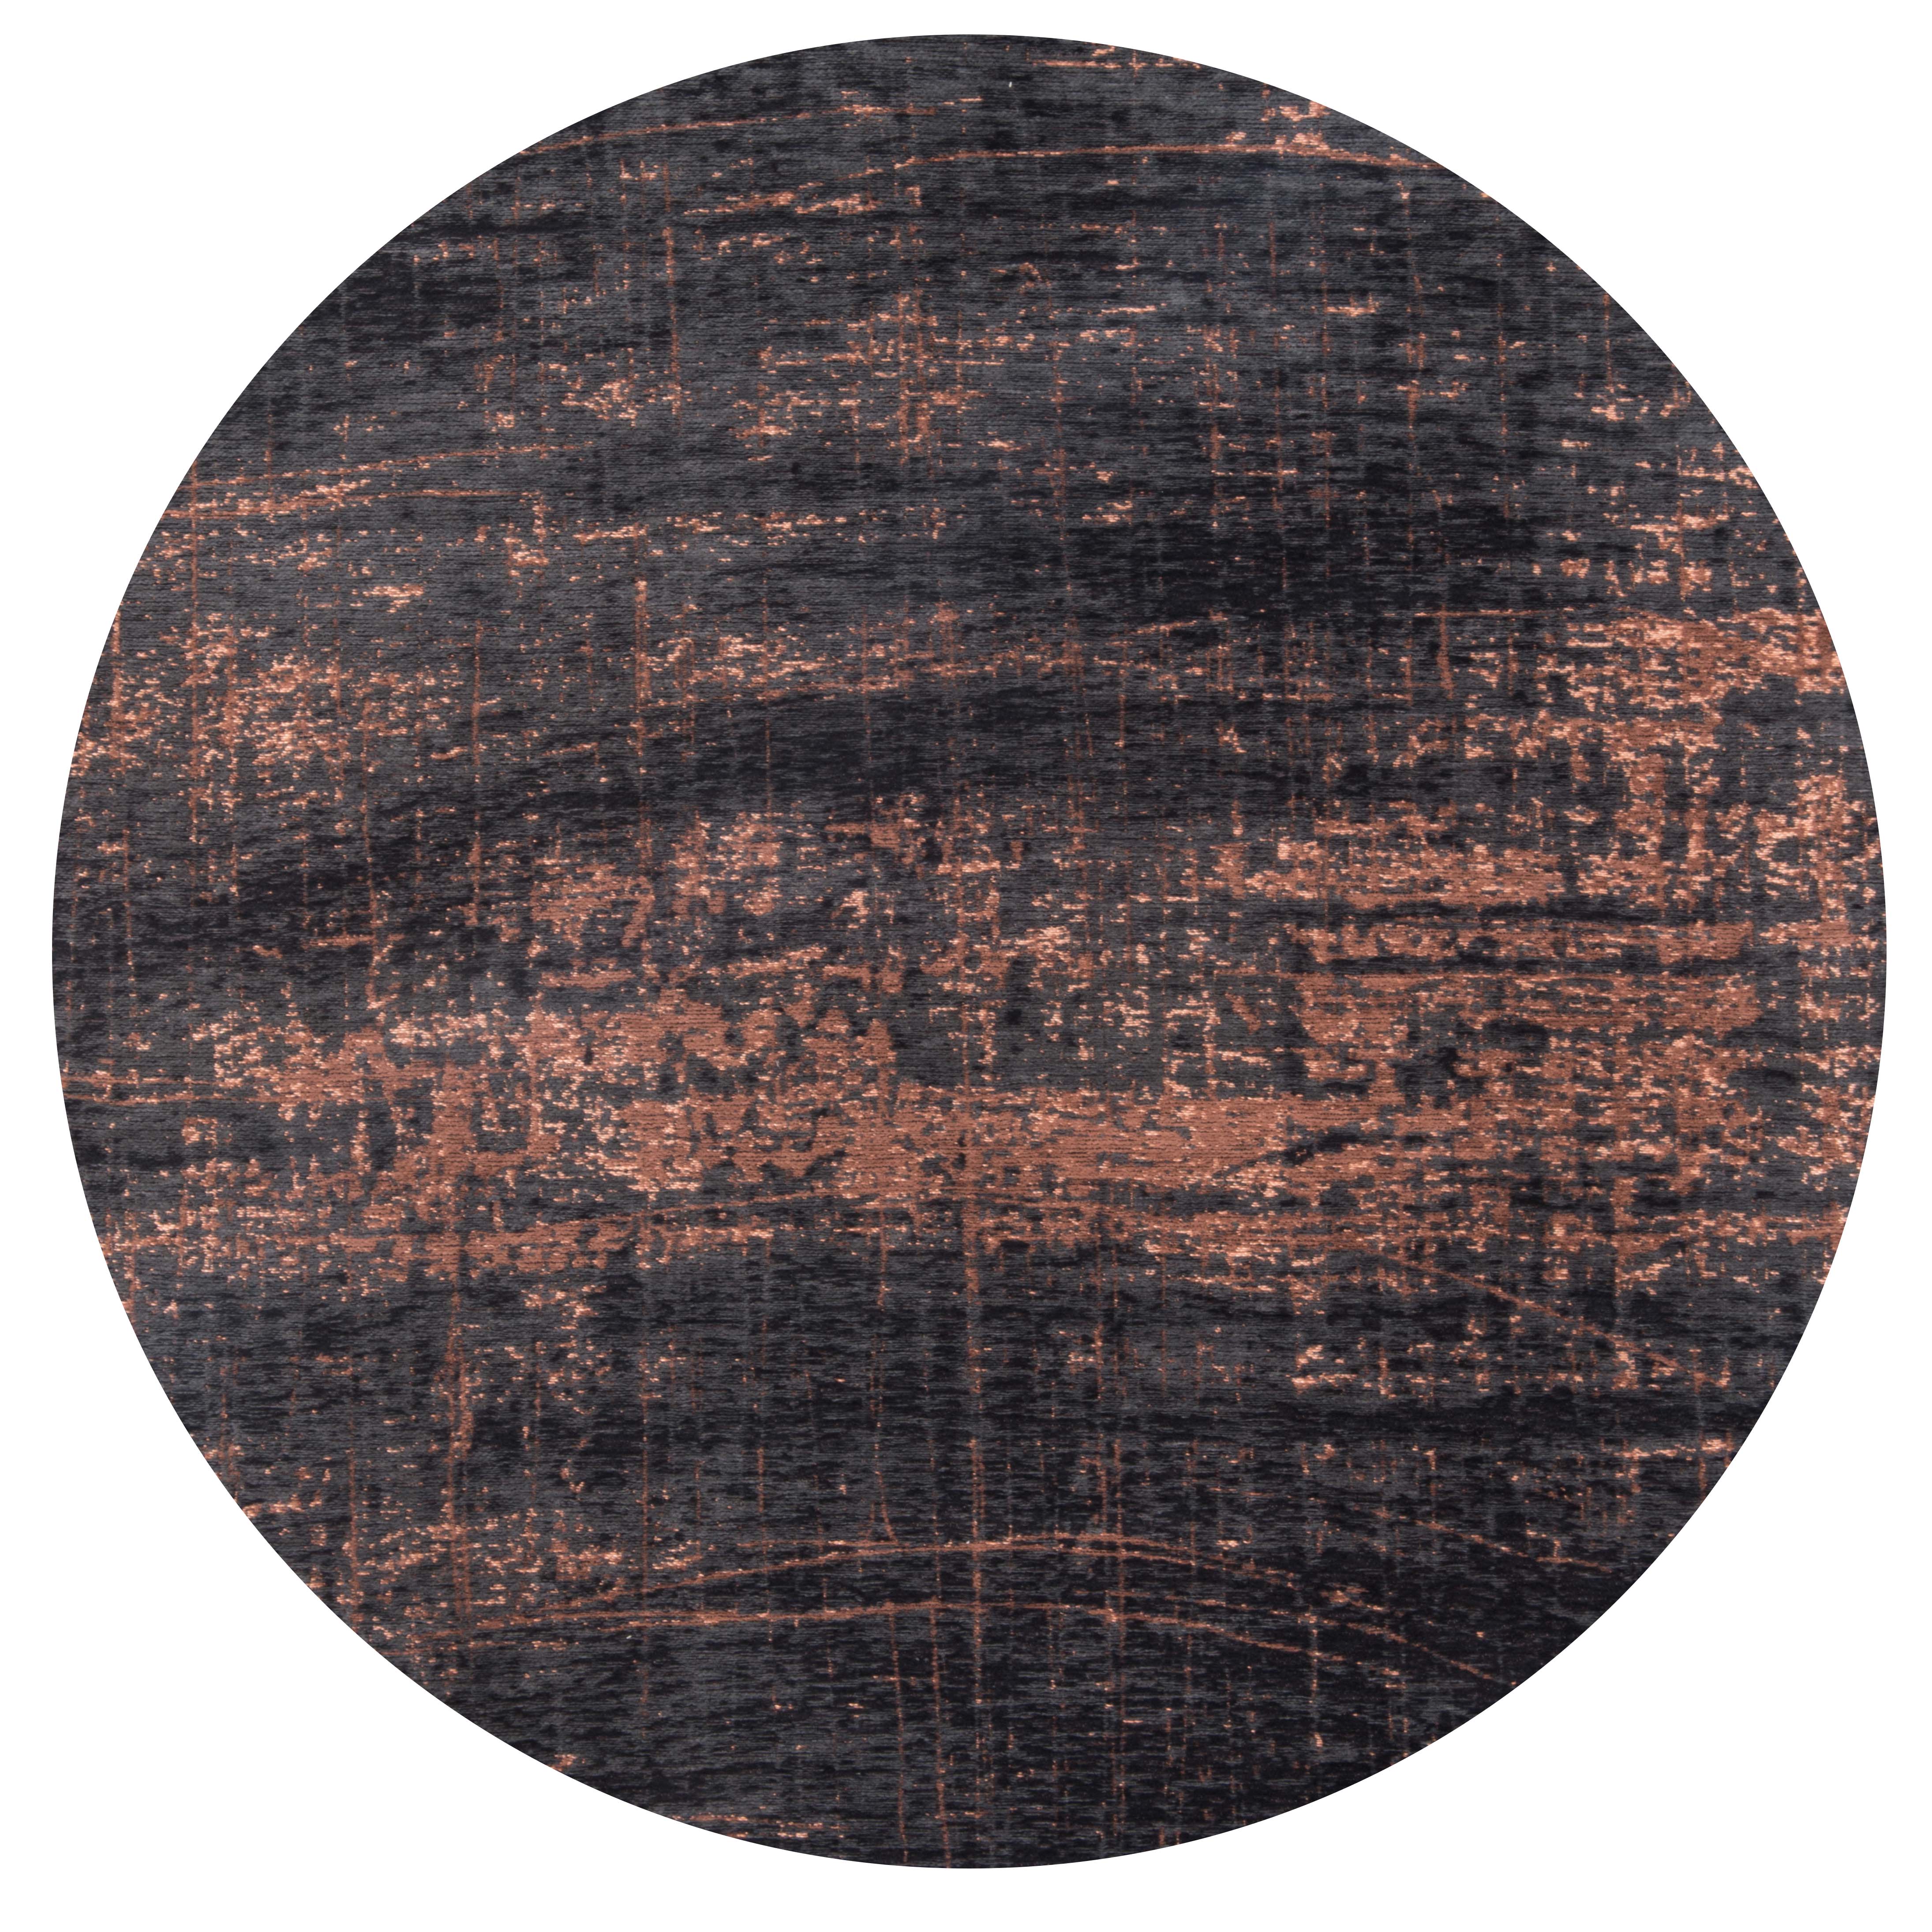 Black circle flatweave rug with copper brown abstract pattern